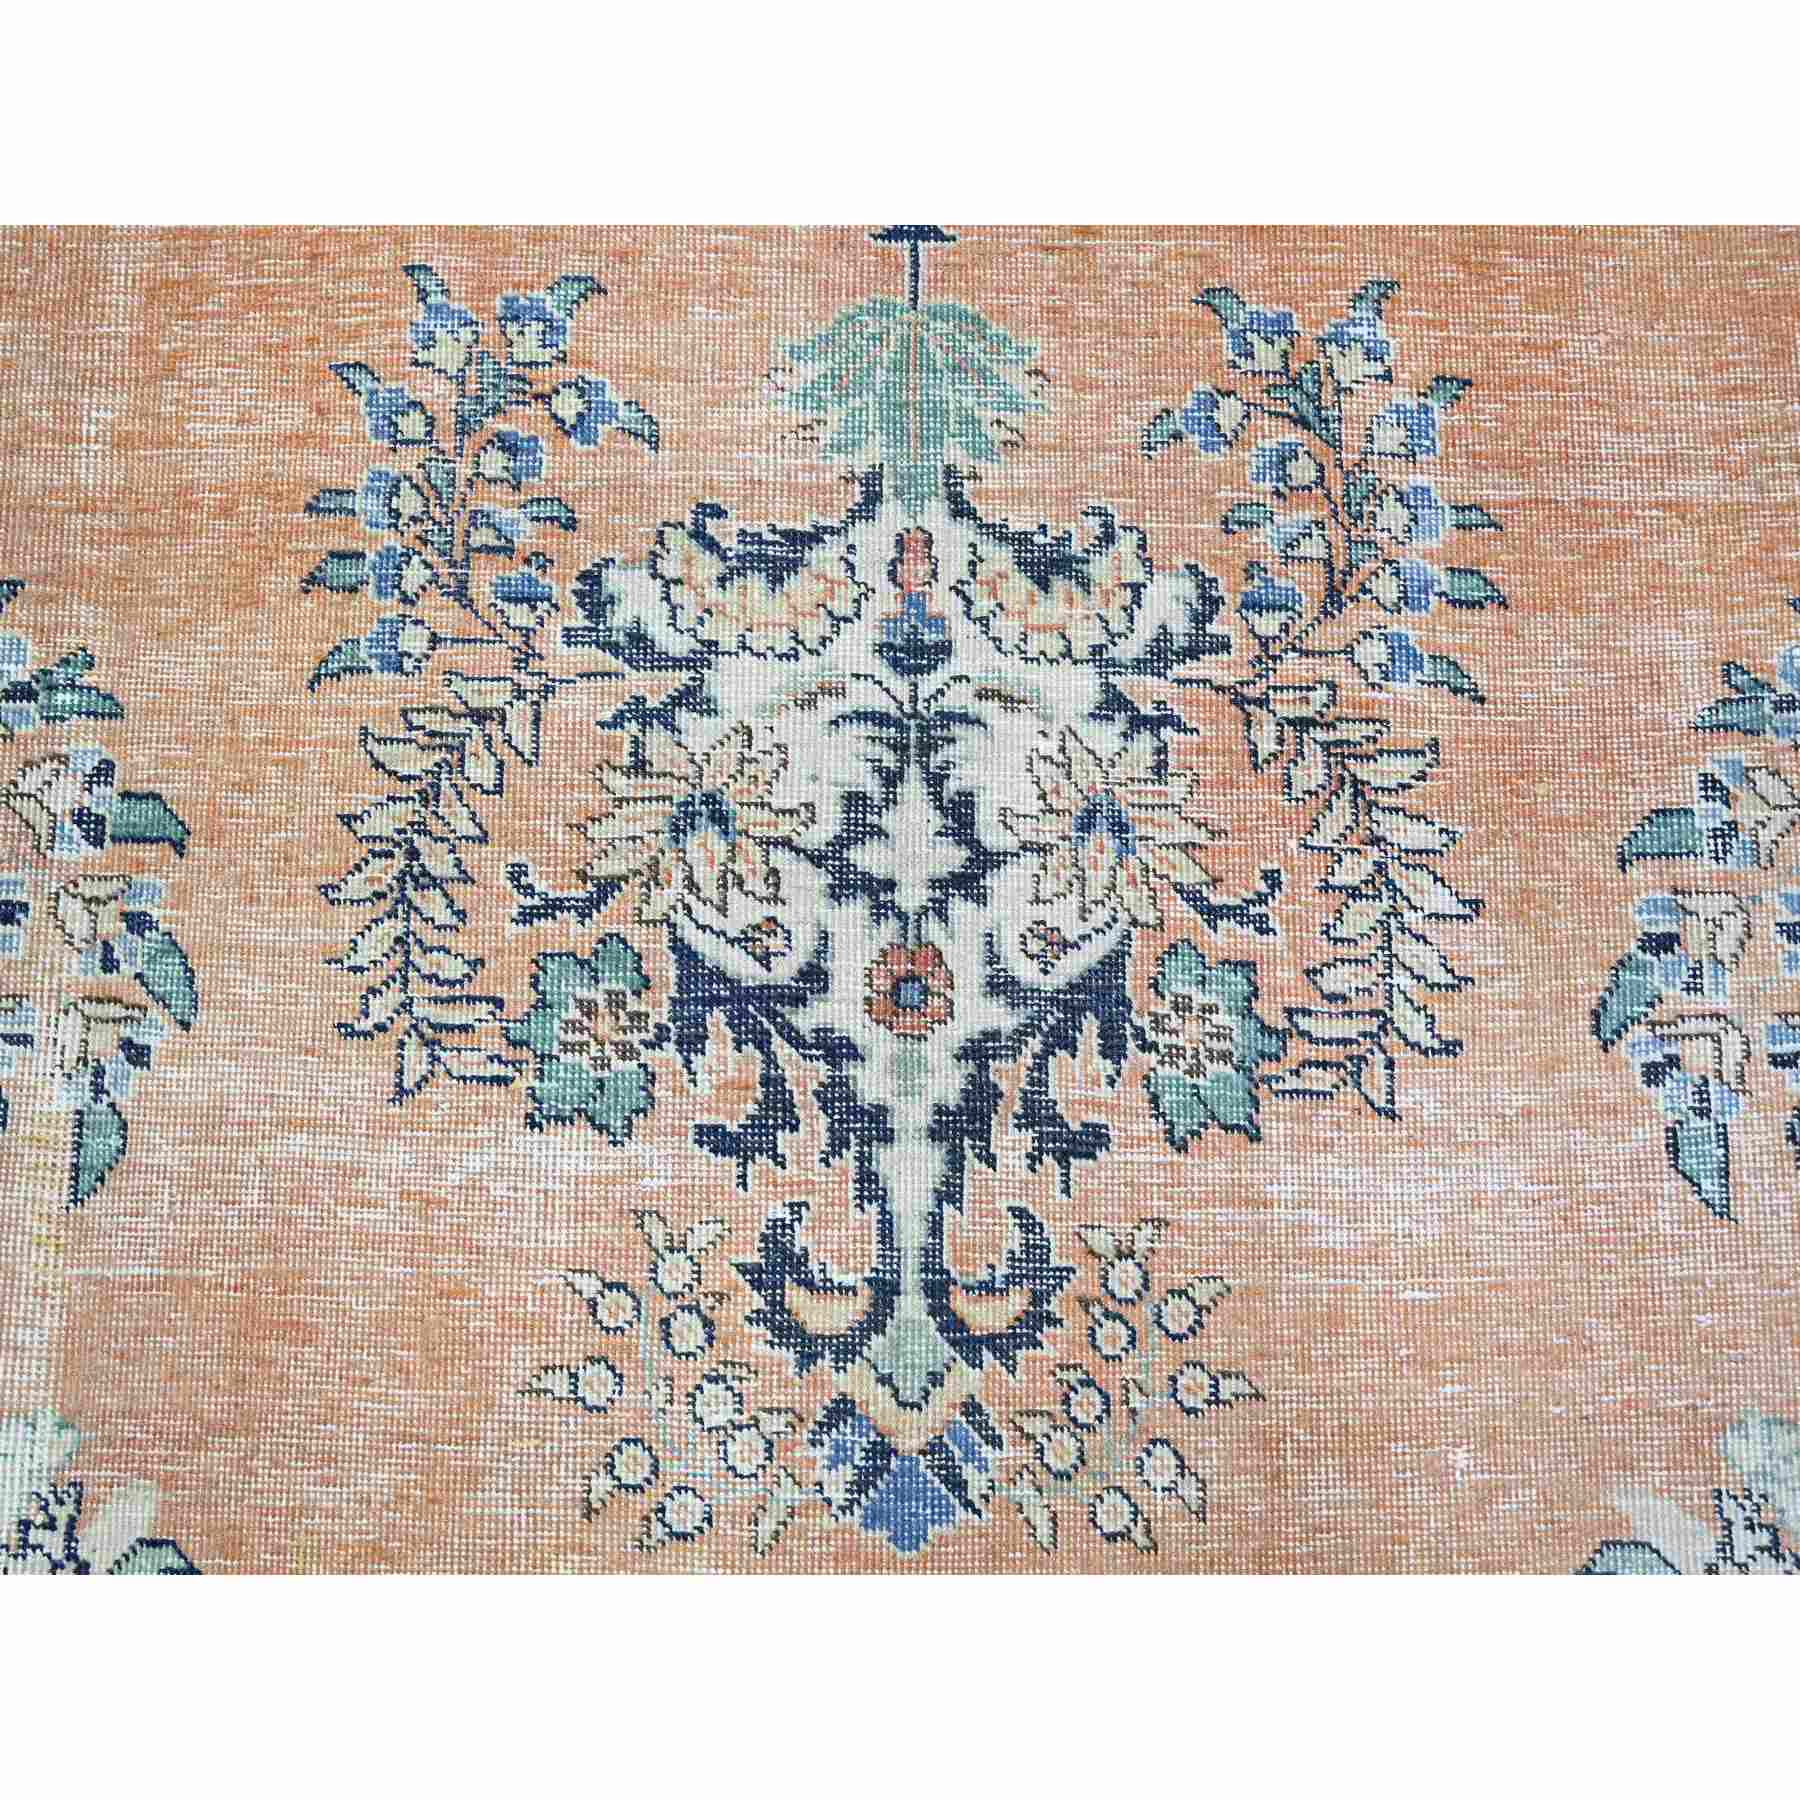 Overdyed-Vintage-Hand-Knotted-Rug-372415